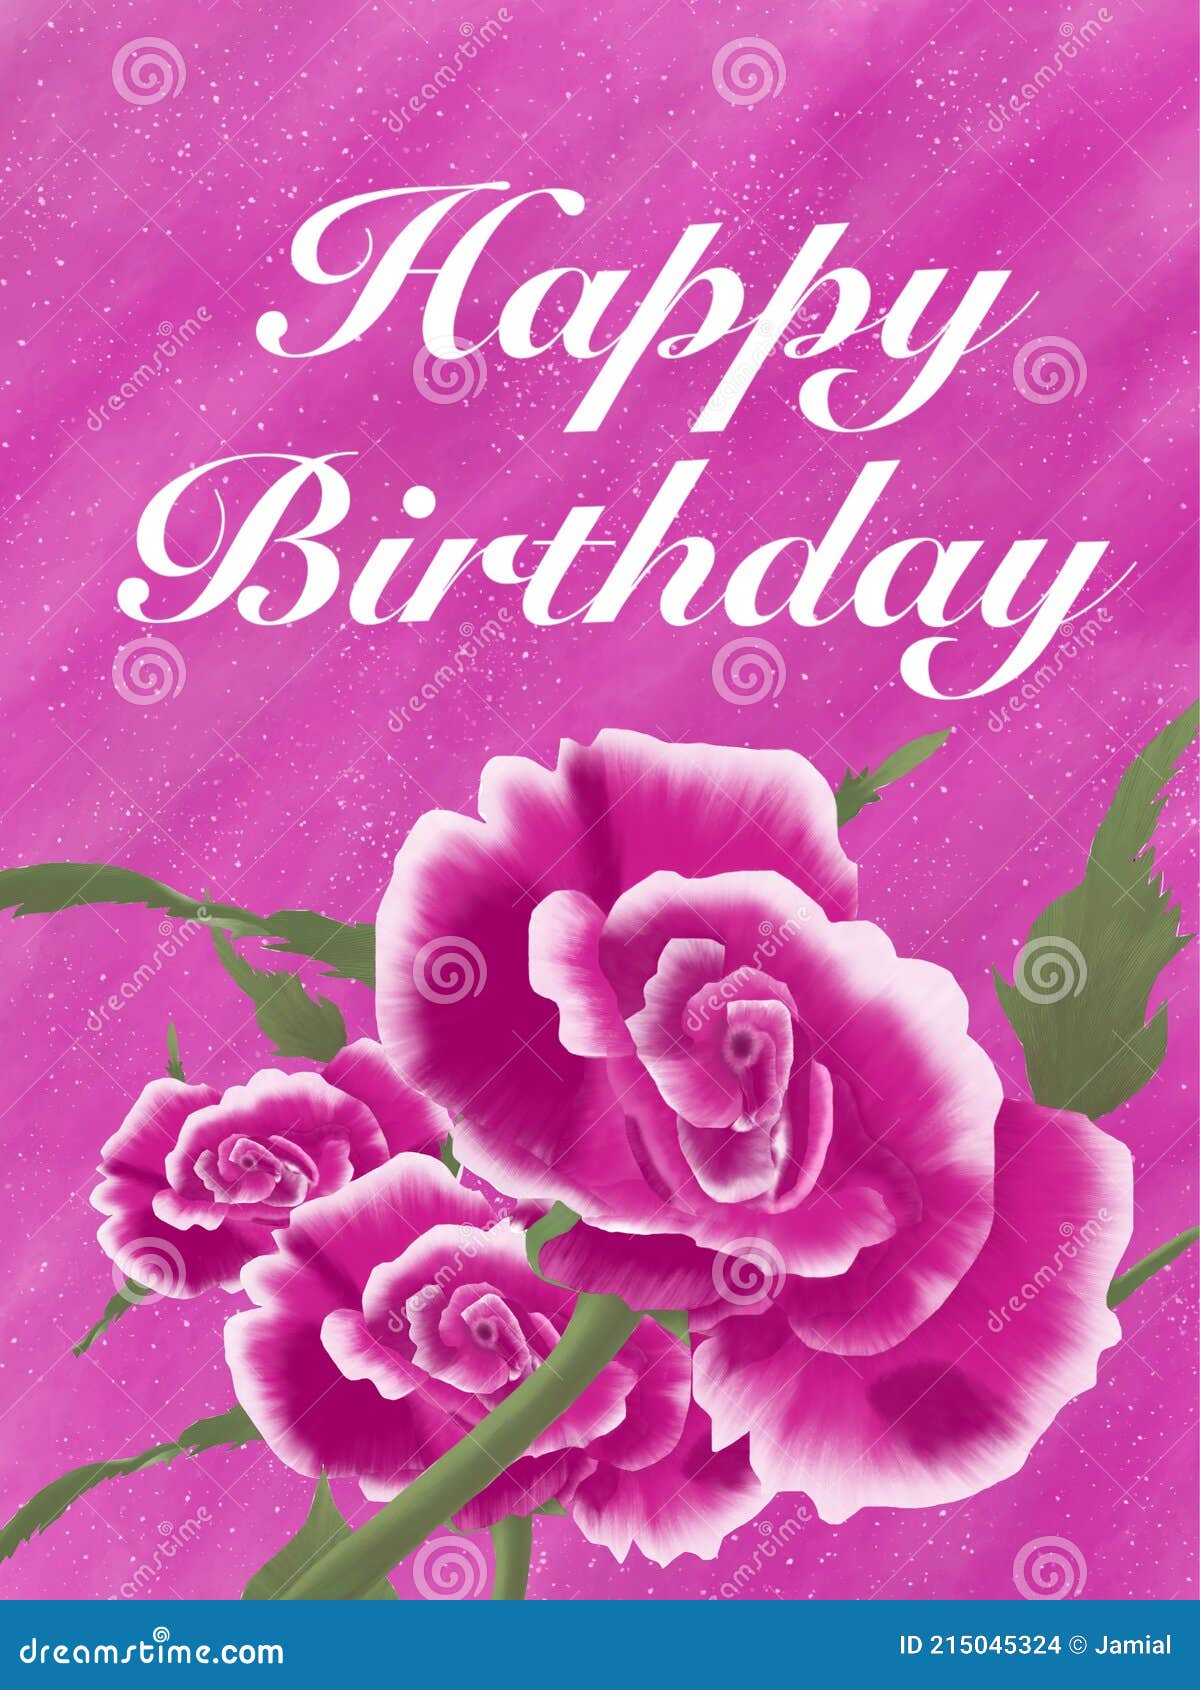 Classic Happy Birthday Greeting Card with Three Unique Roses Stock ...